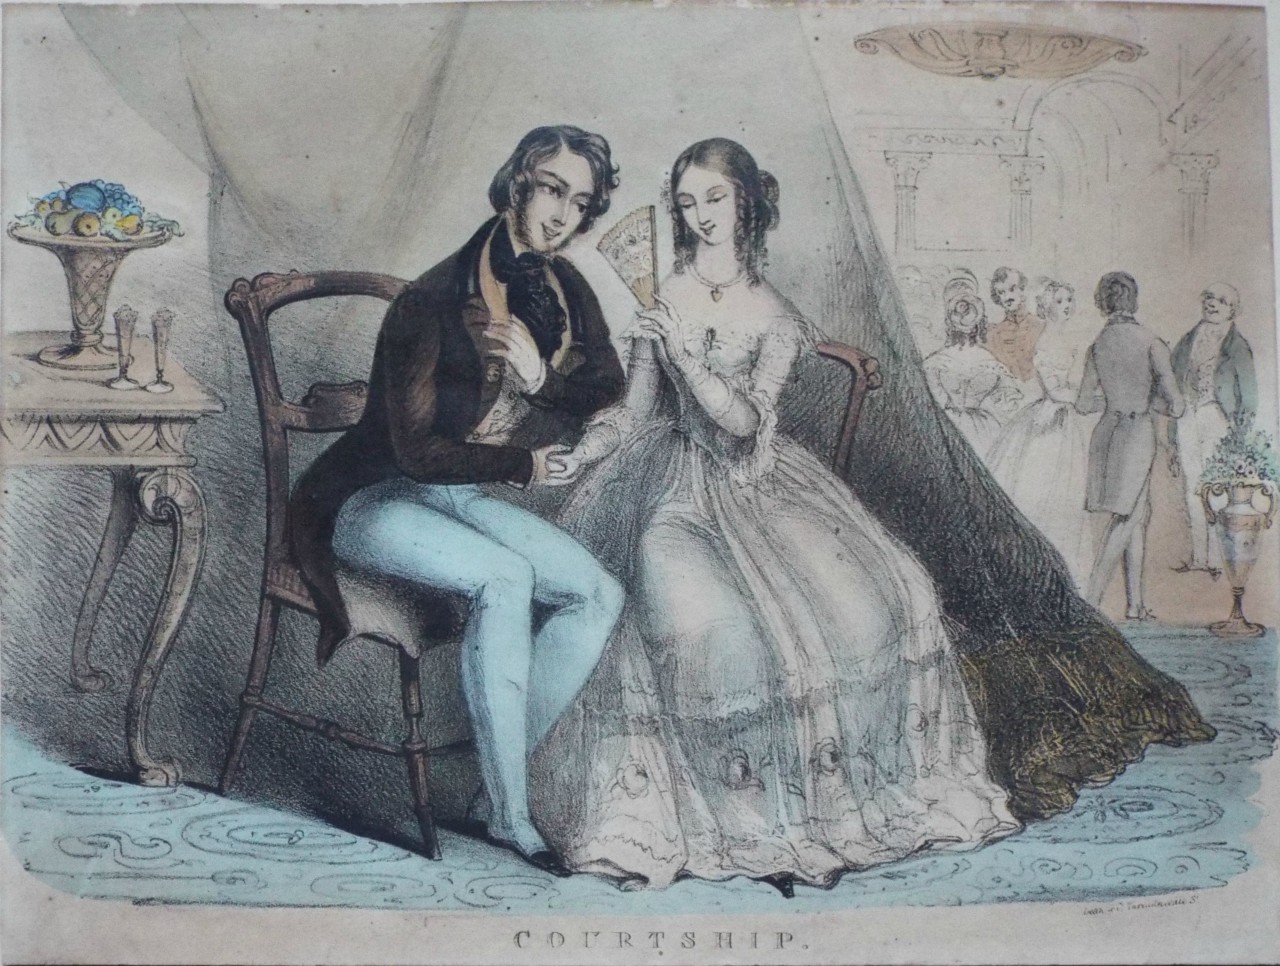 Lithograph - Courtship